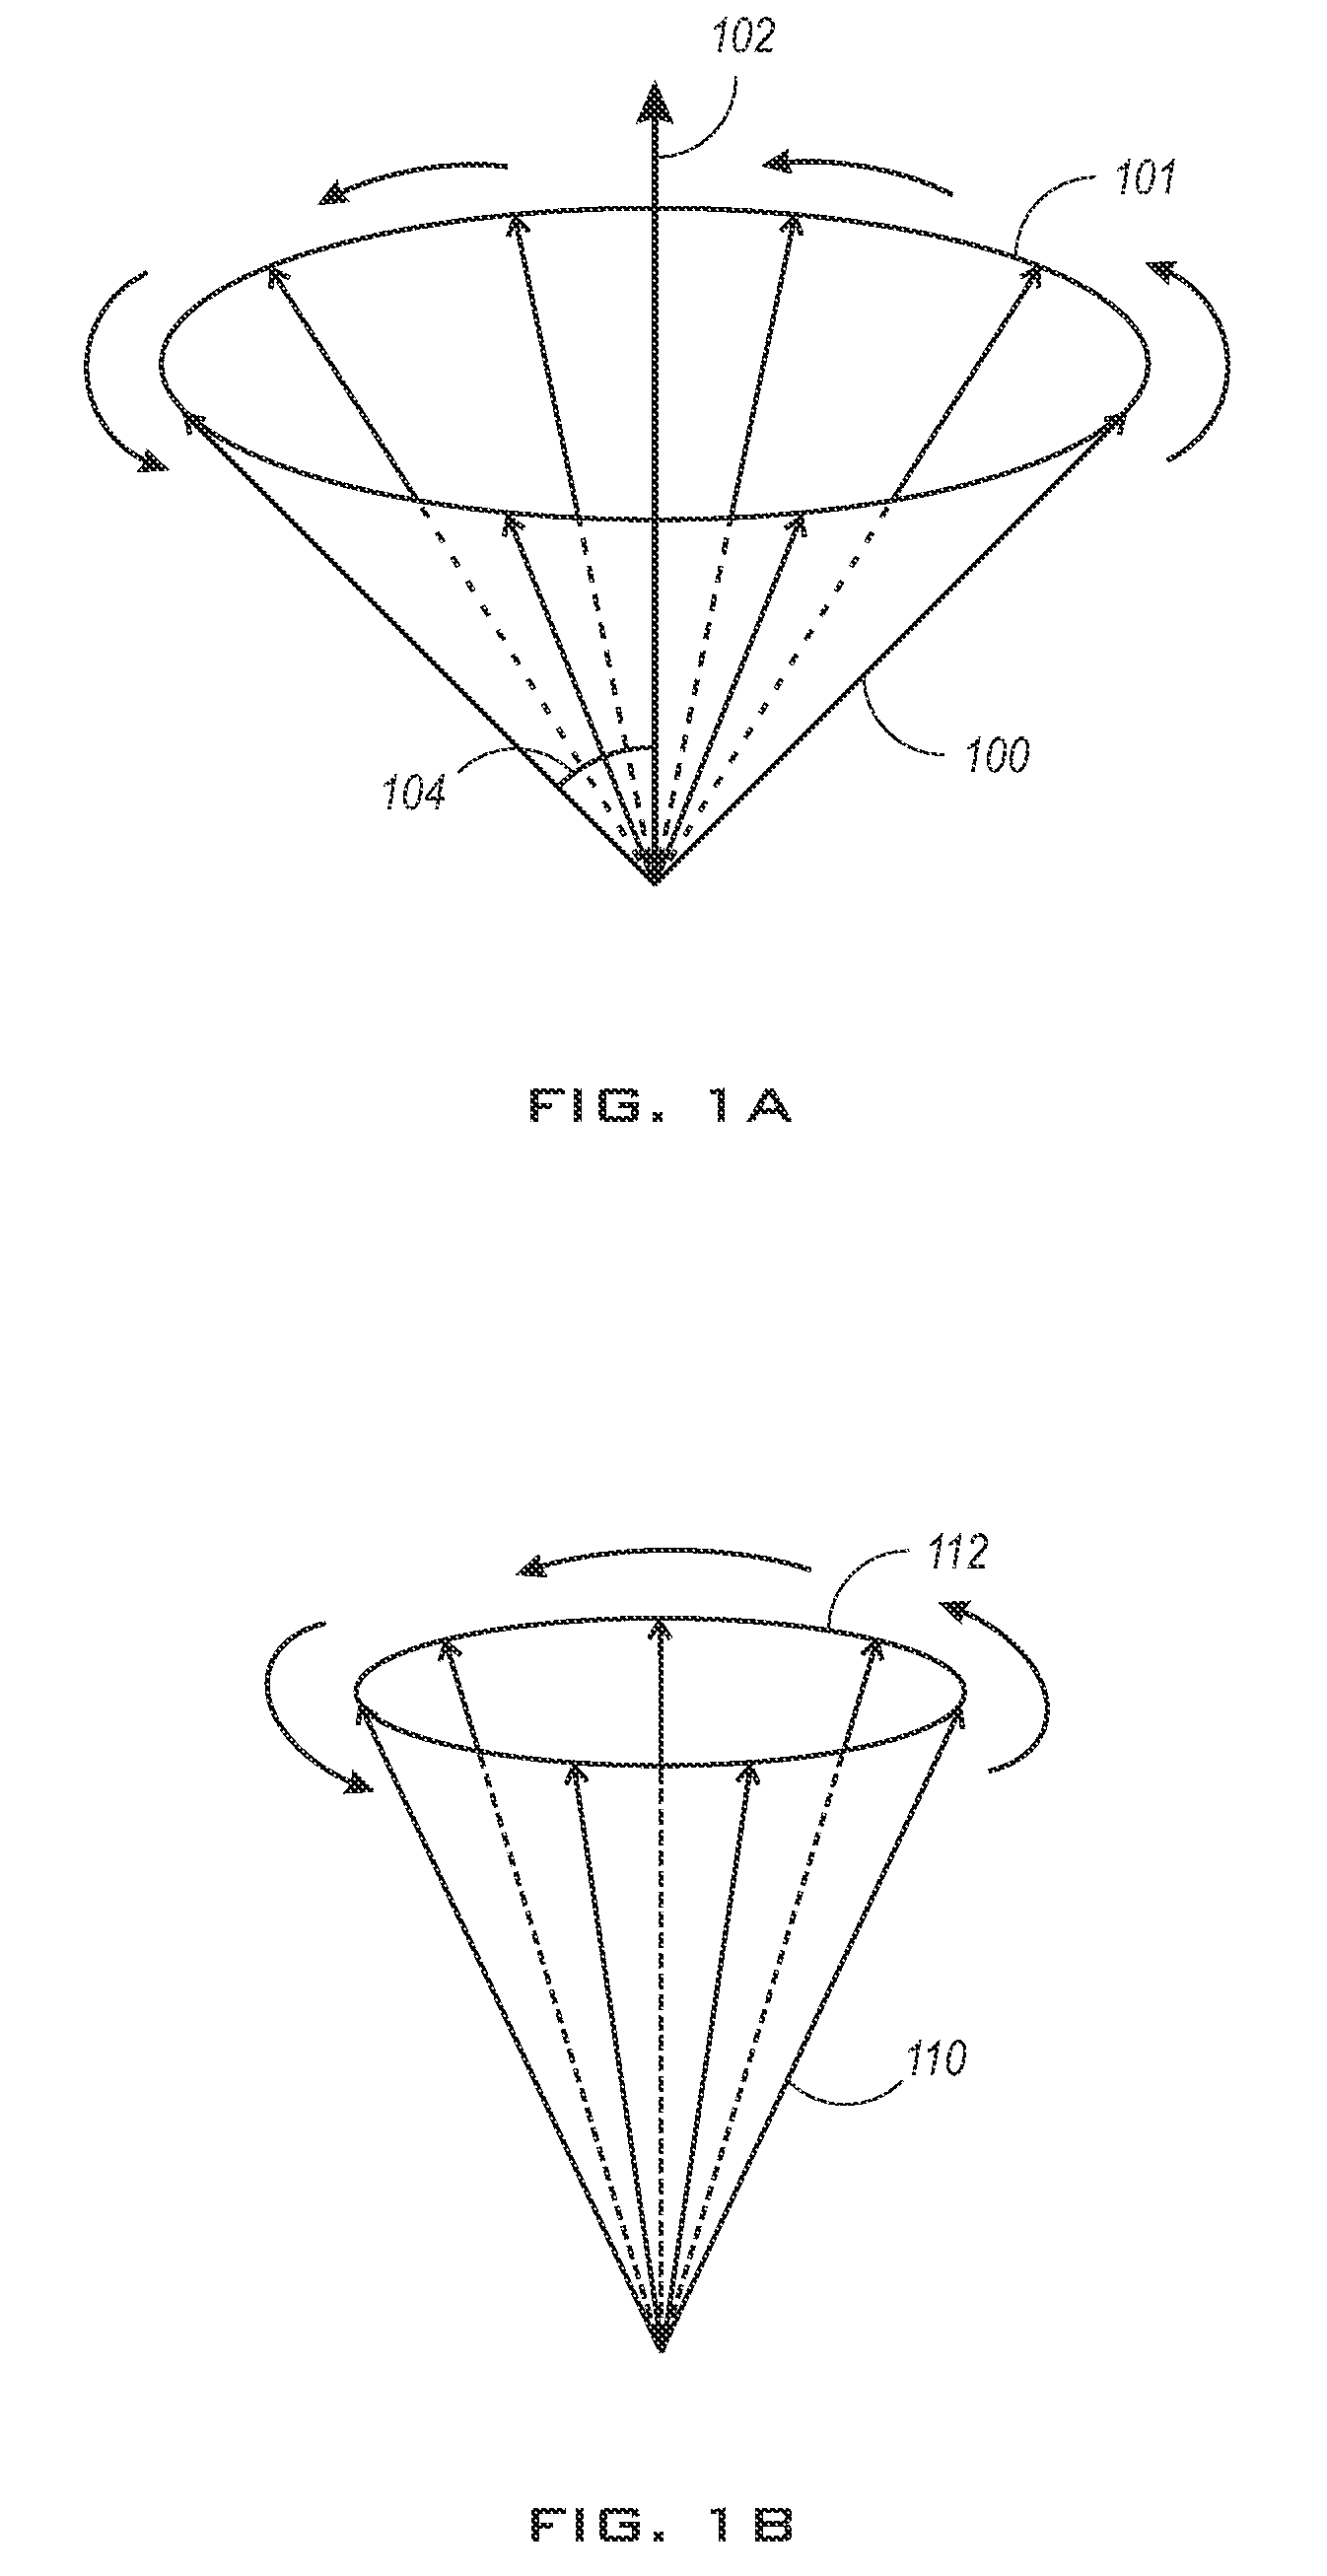 NMR system and method having a permanent magnet providing a rotating magnetic field